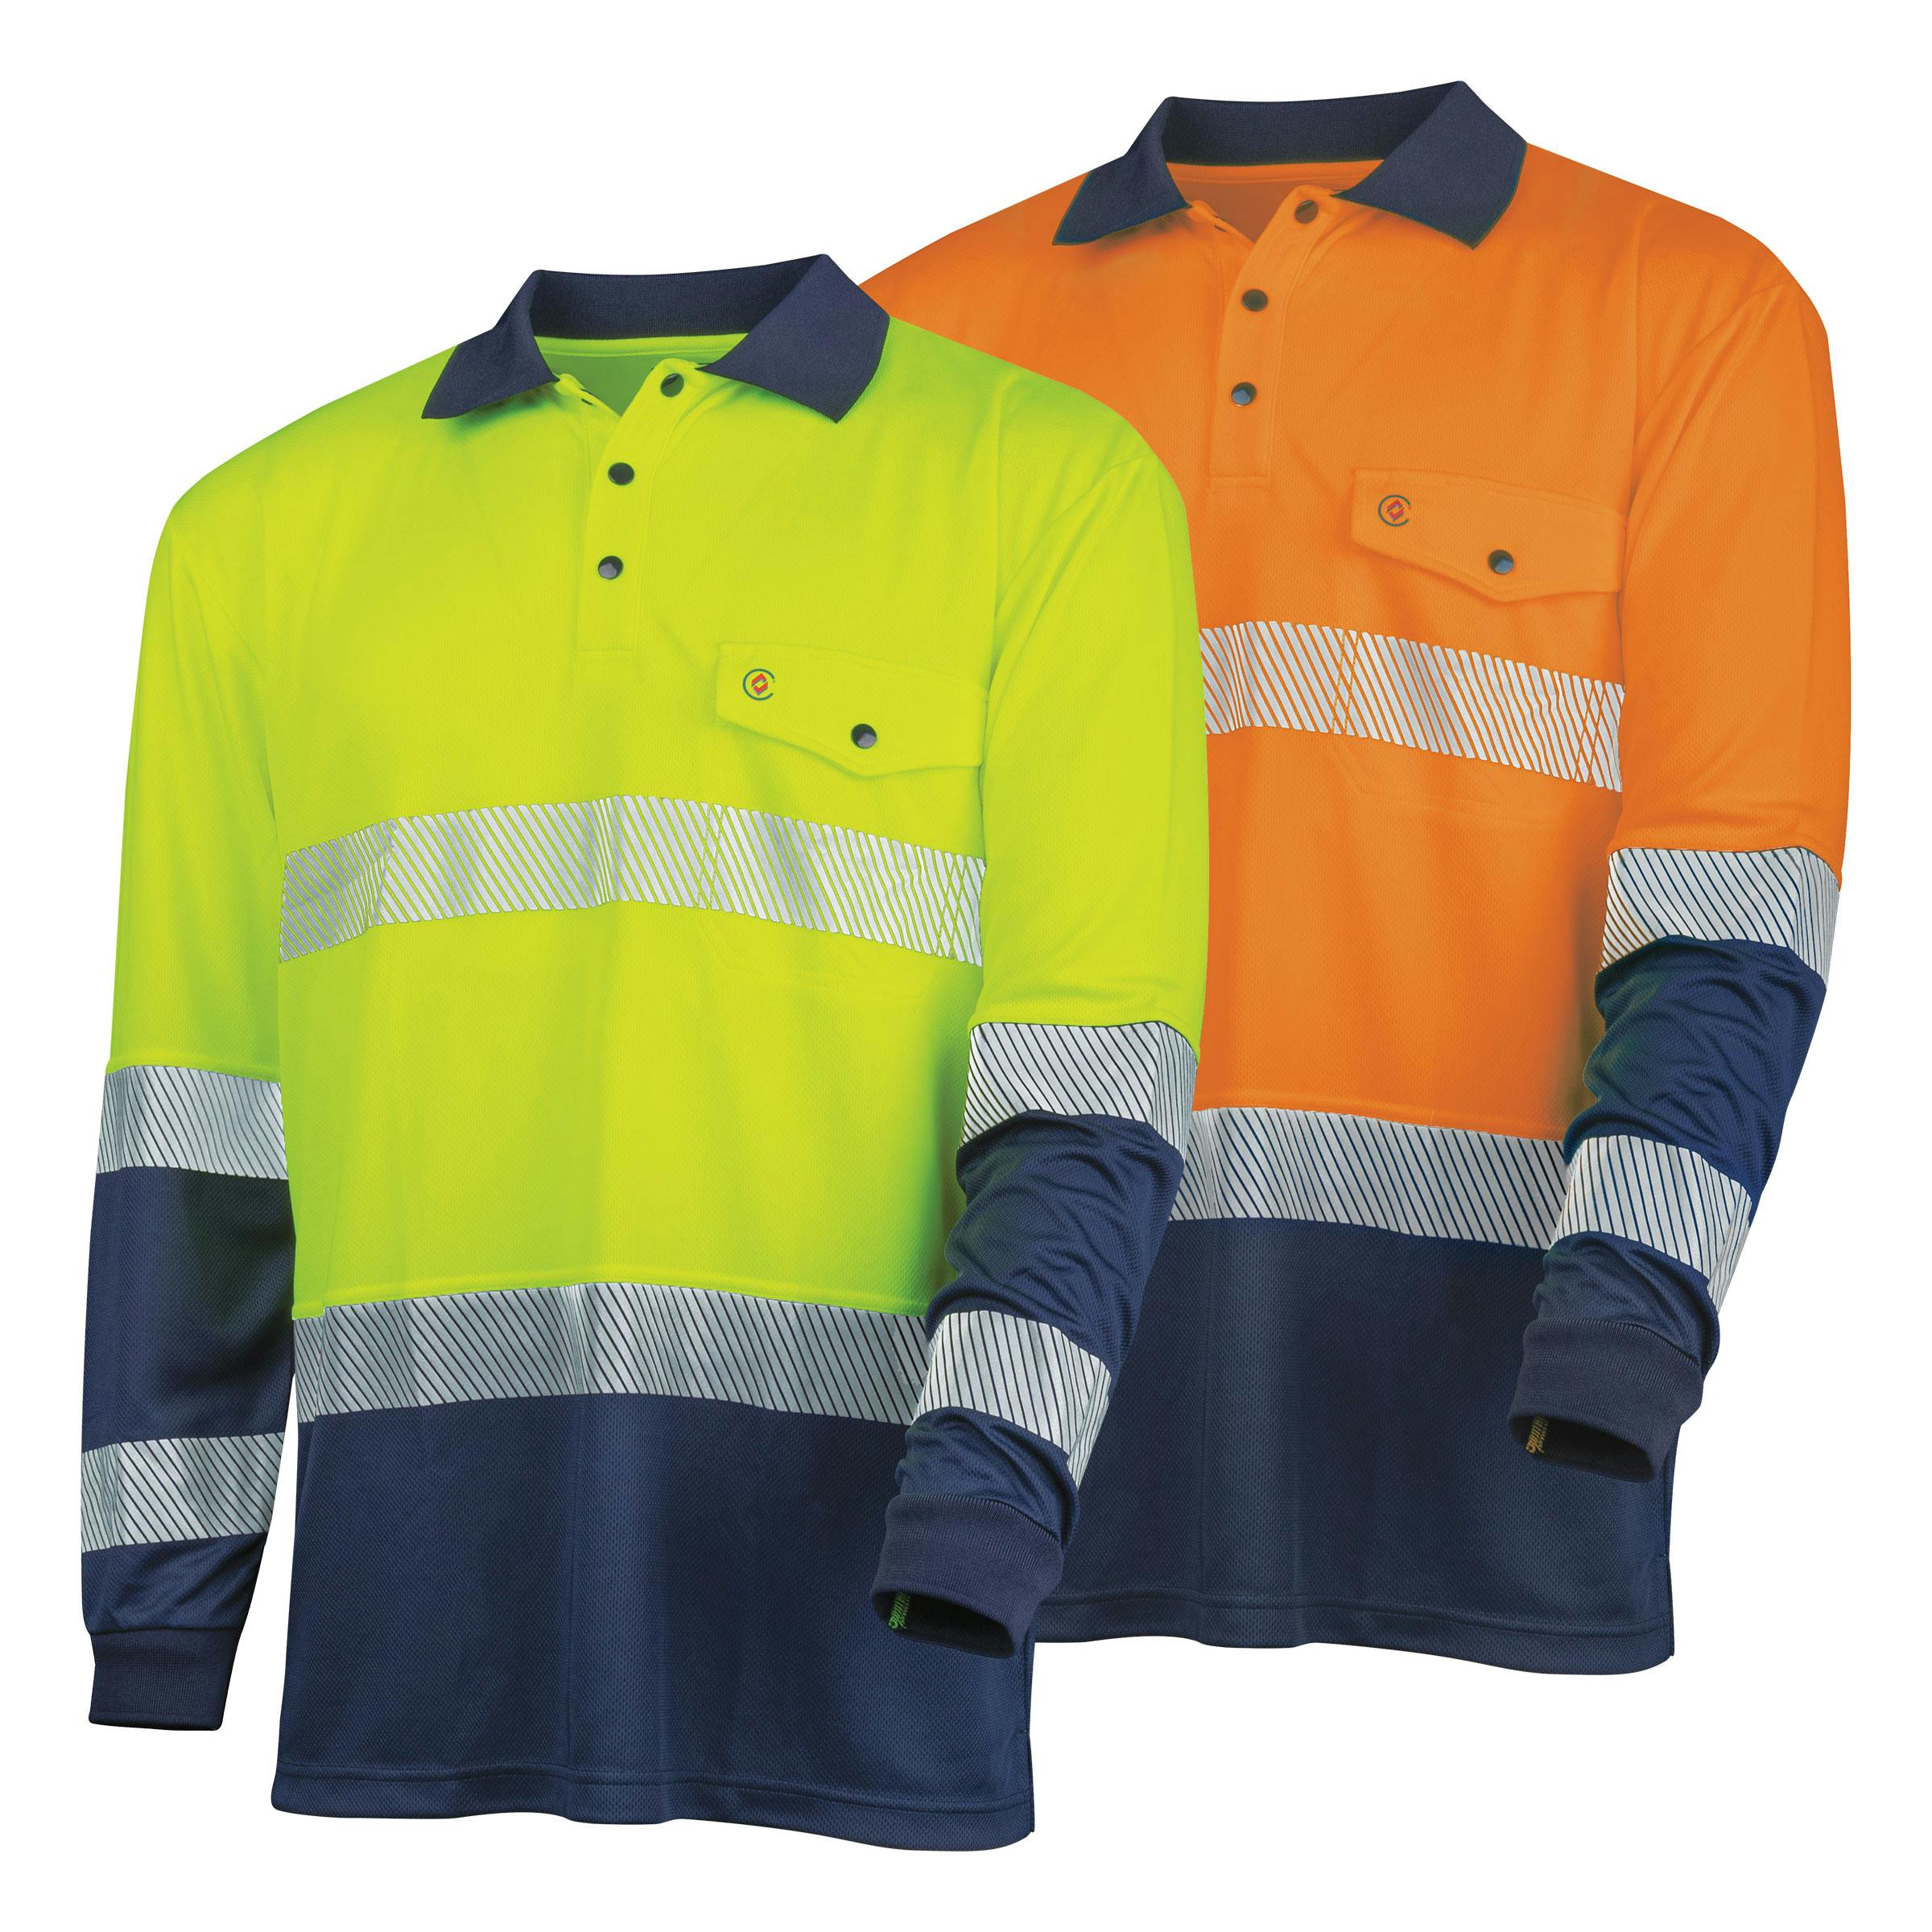 TRu Workwear Polo 175gsm Recycled Polyester Anti- Microbial Micromesh L/S Two Tone With Segmented Reflective Tape